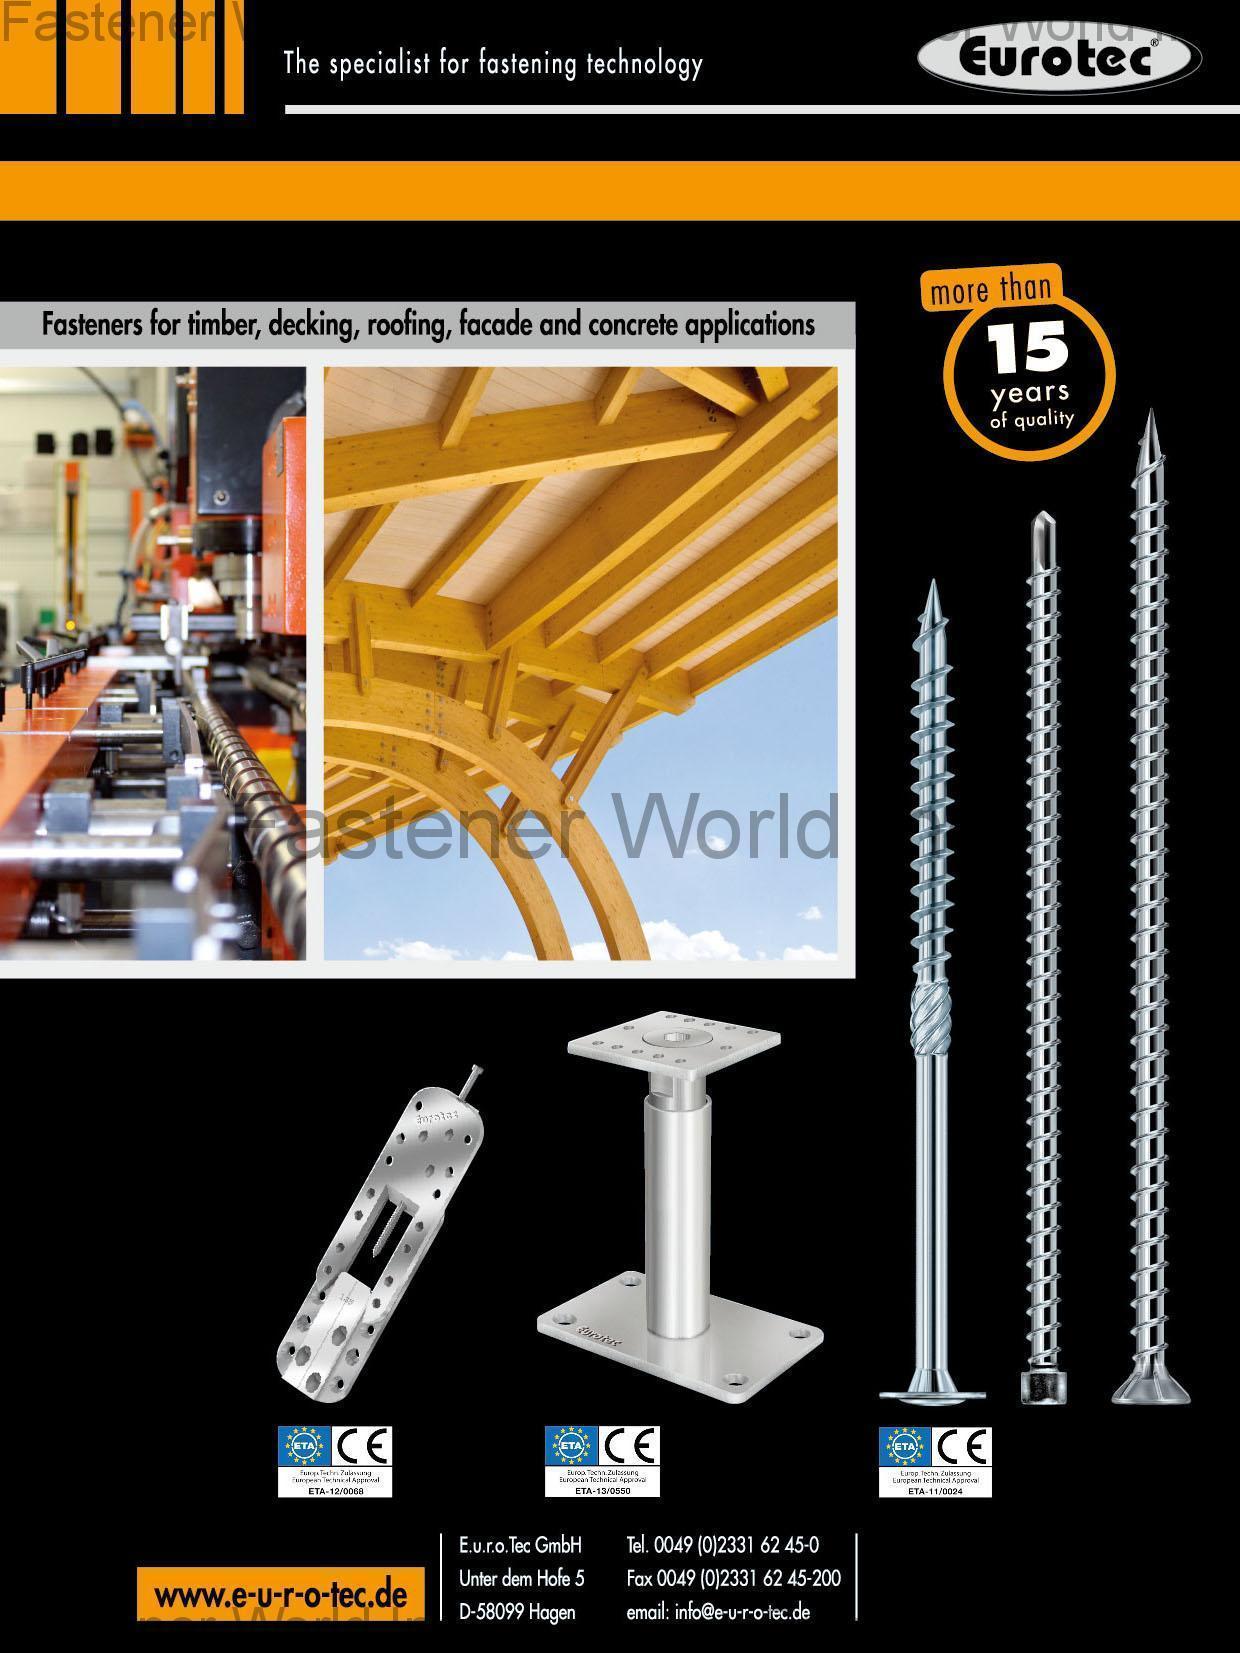 EUROTEC GMBH (E.U.R.O.Tec GmbH ) , Fasteners for timber, decking, roofing, facade and concrete applications , All Kinds of Screws